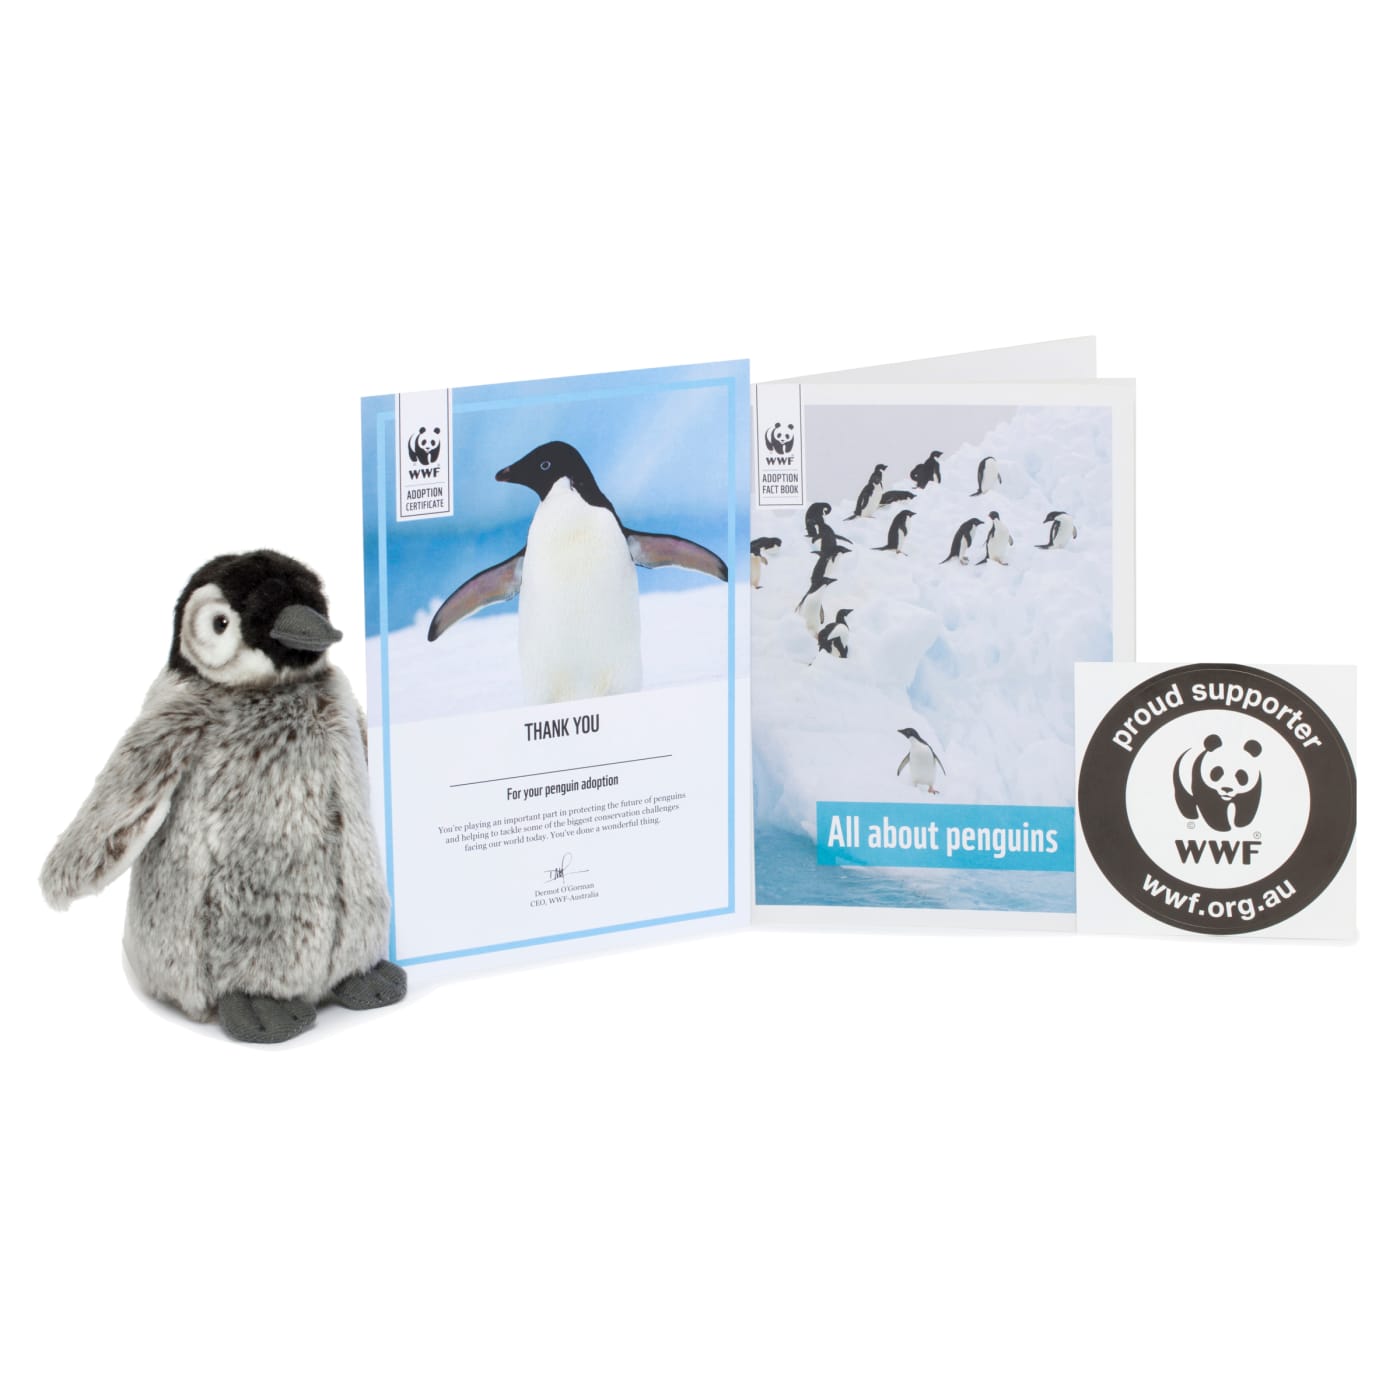 Contents of penguin adoption pack, including penguin plushie, adoption certificate and penguin booklet